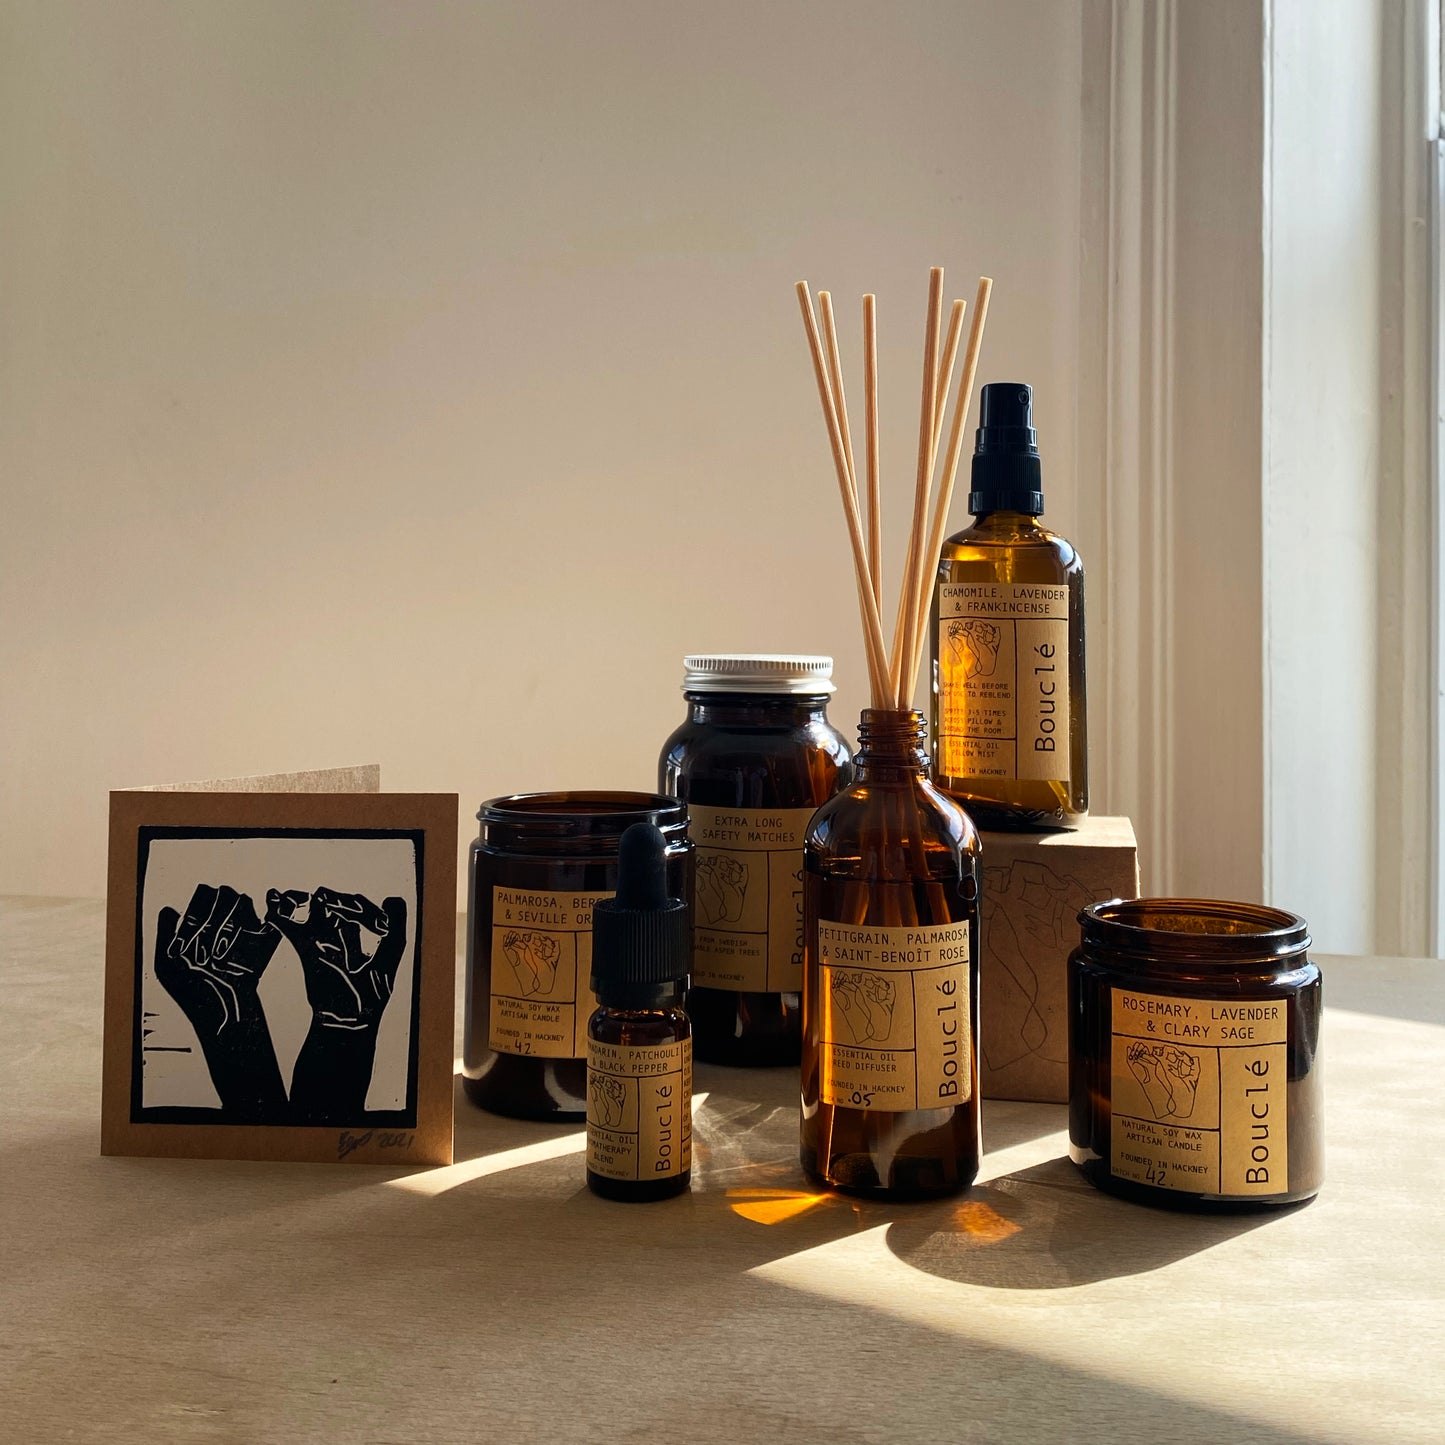 Bouclé London essential oil home fragrance including soy candle, bath salts, pillow spray and essential oil blend along side a hand printed card